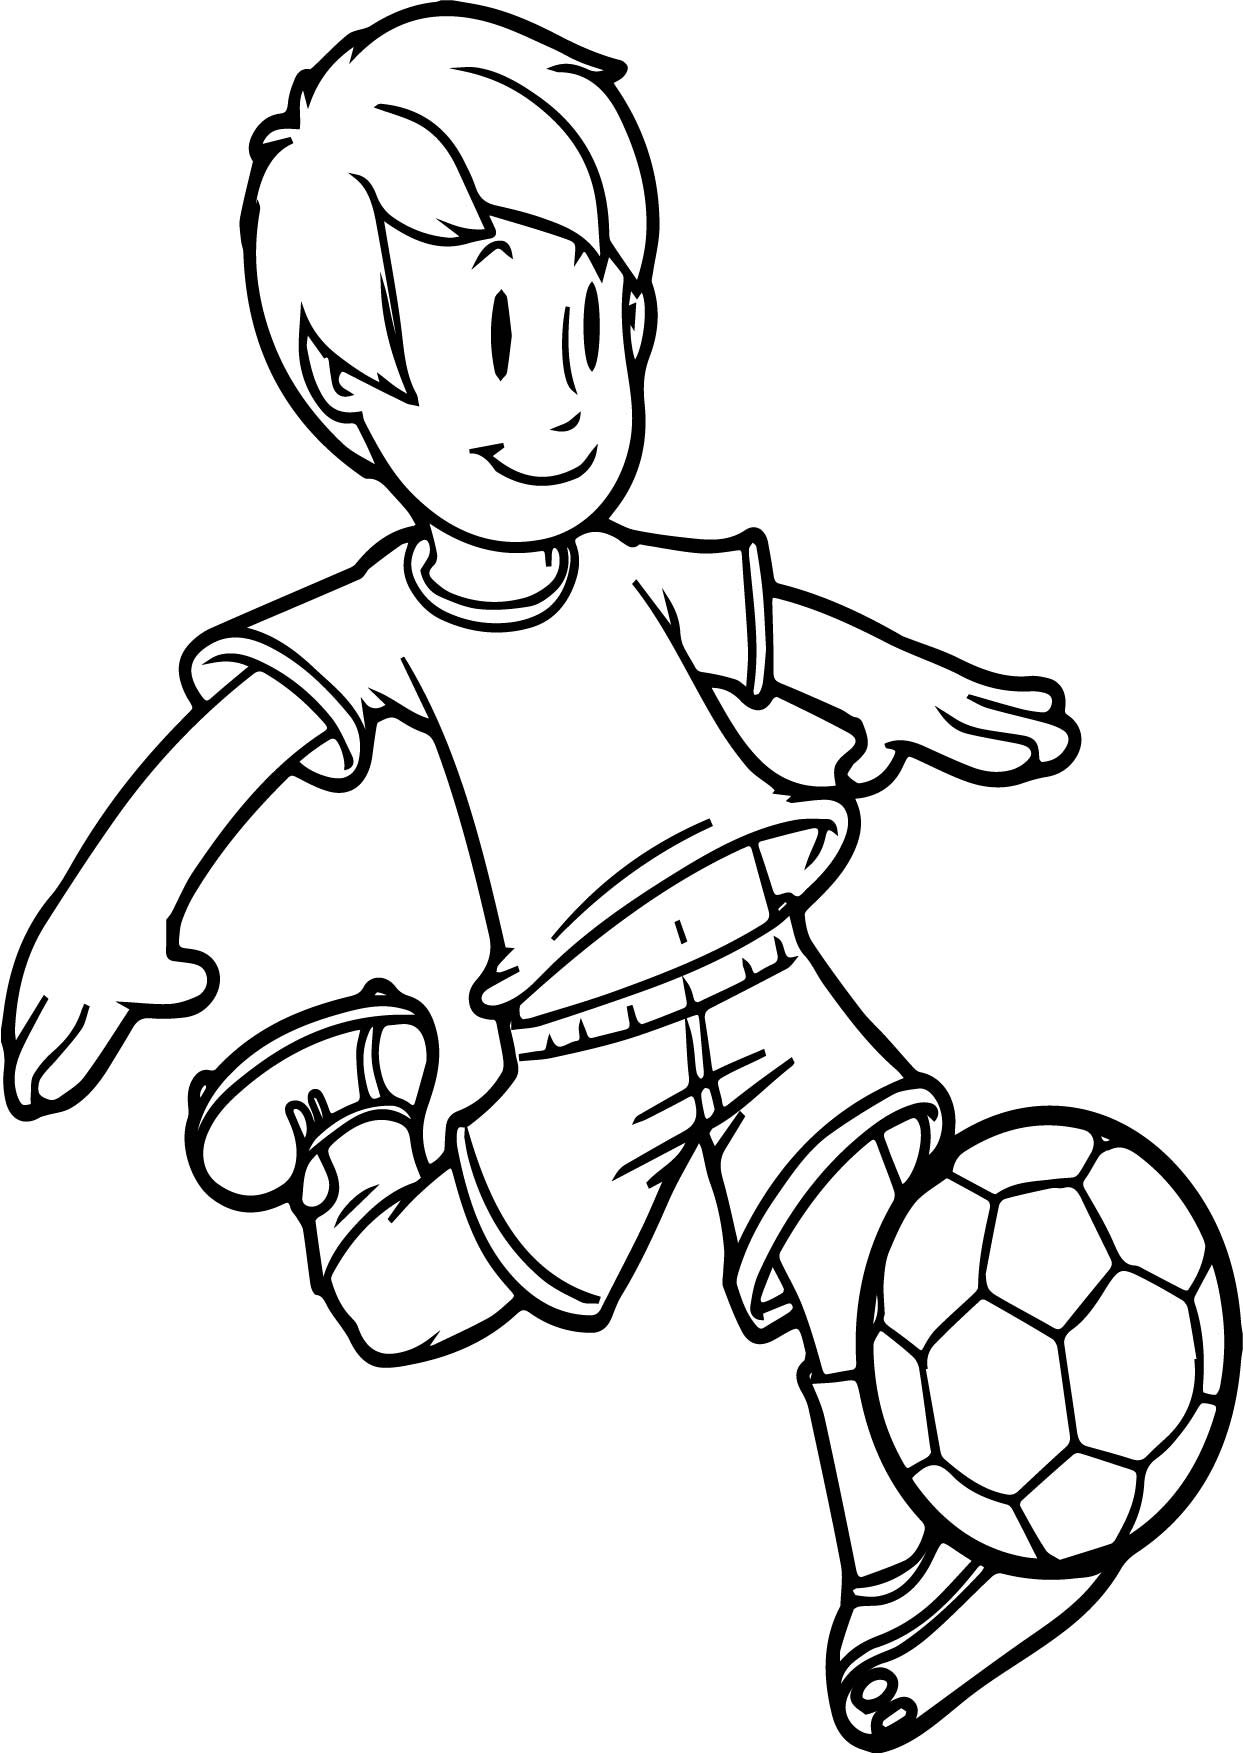 Cartoon Boy Coloring Pages At Getcolorings Com Free P - vrogue.co